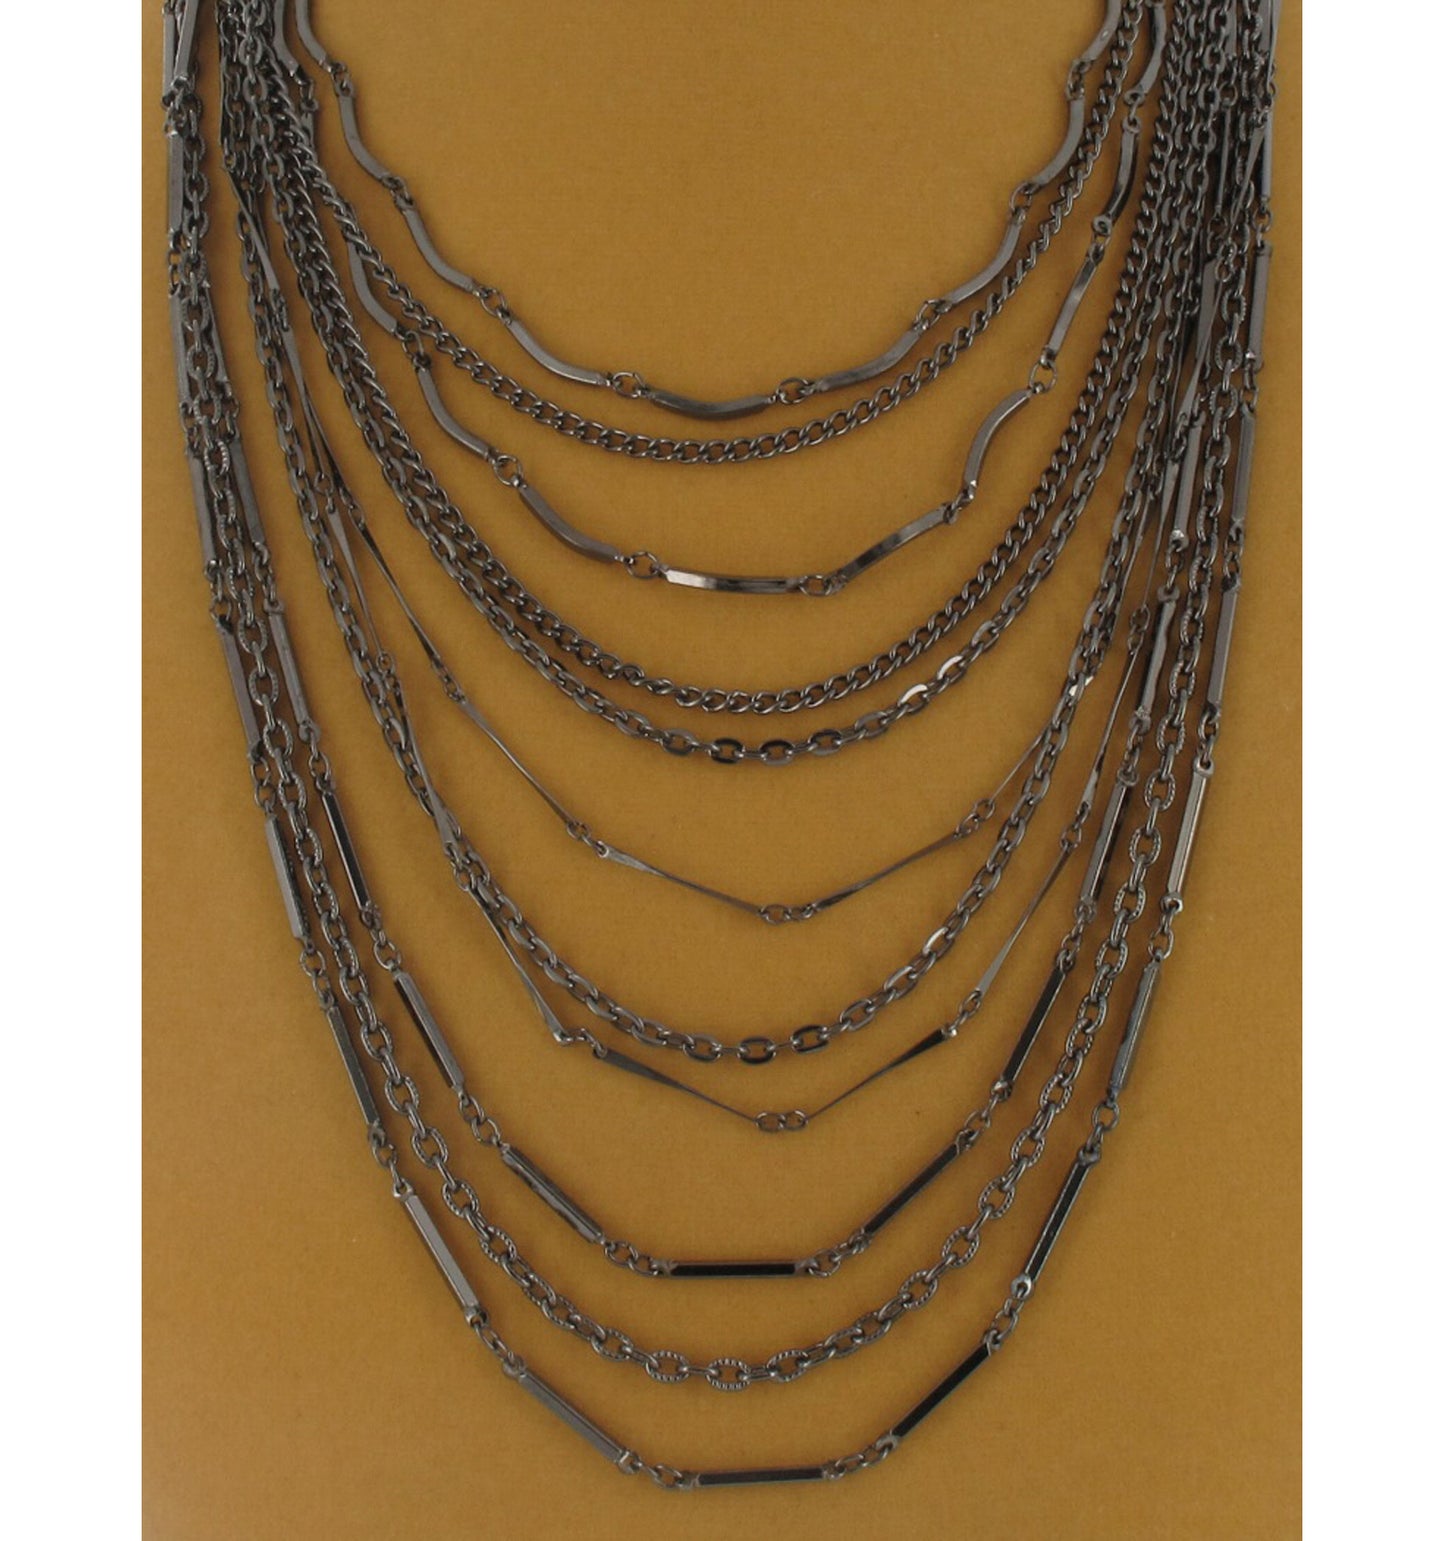 Ky & Co Gunmetal Gray Multi Strand Layered Chain Link Necklace 14" 24"